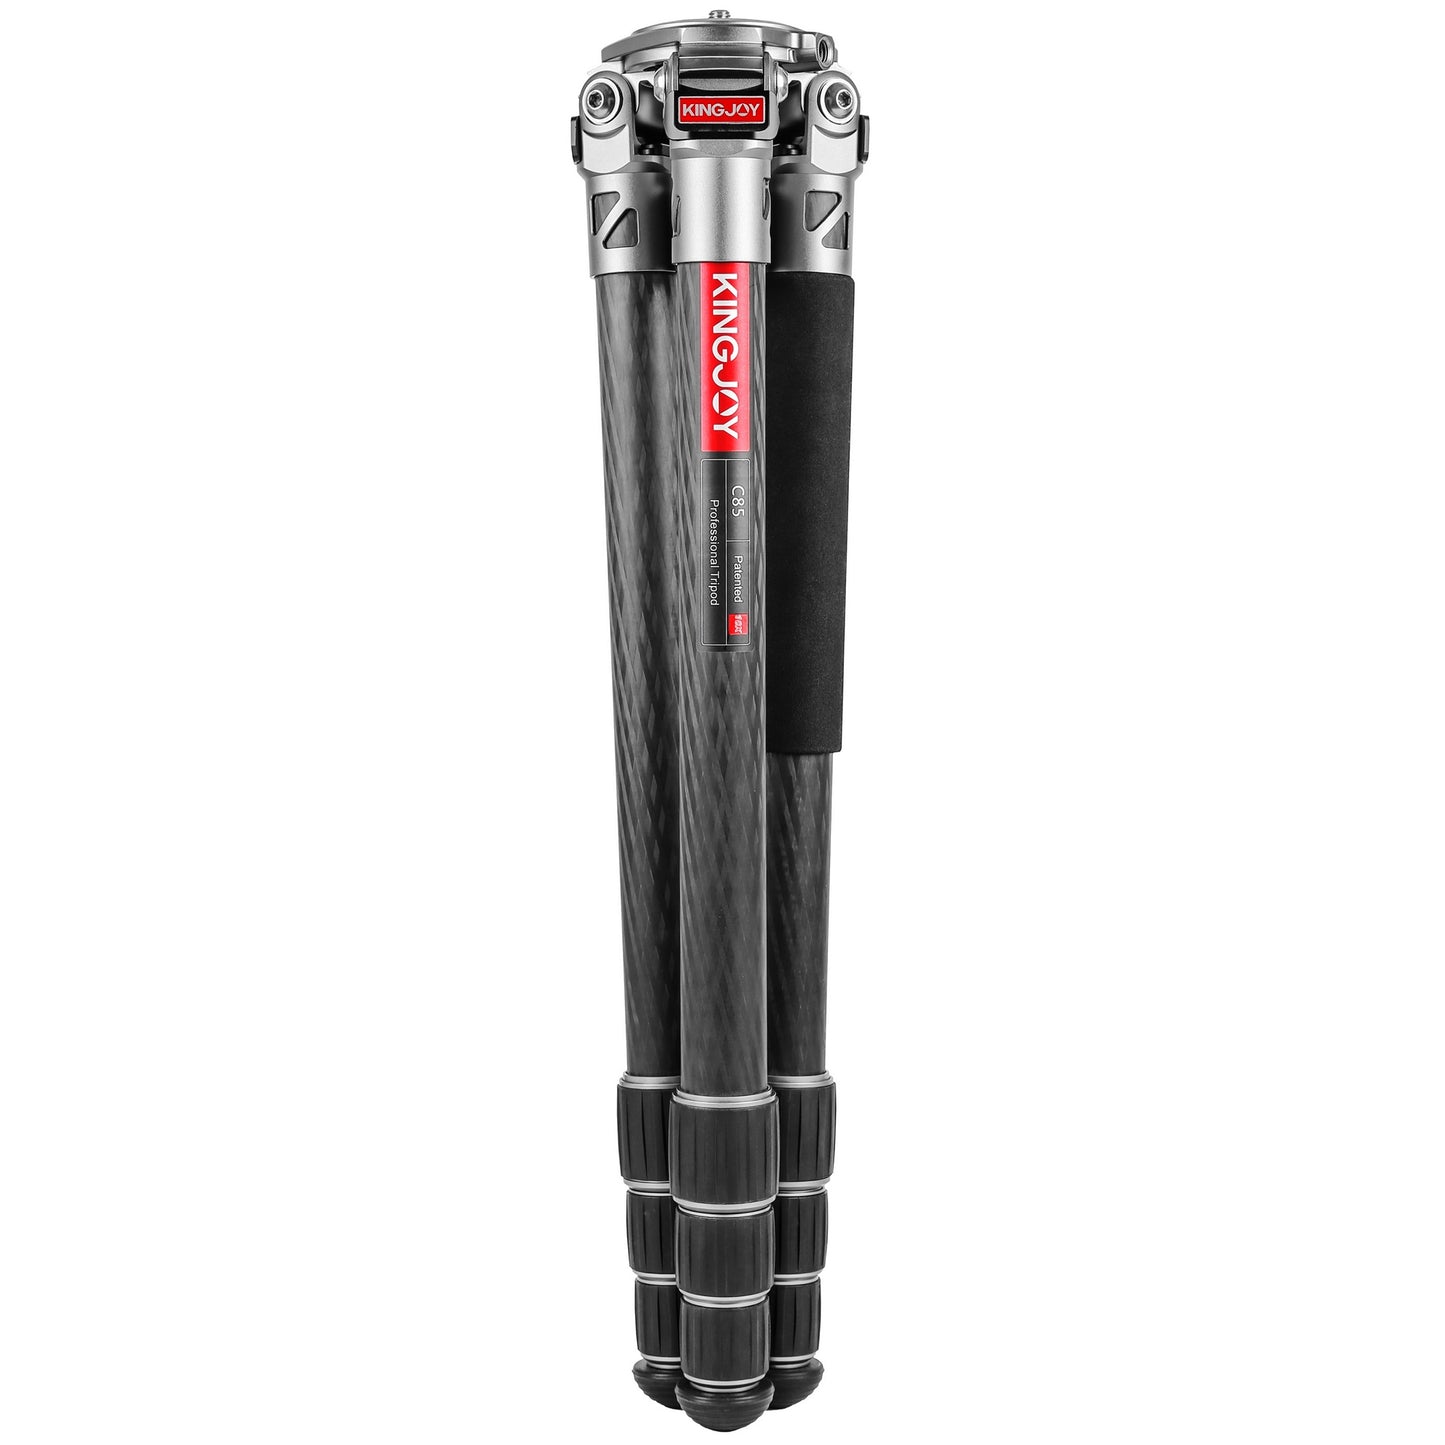 Kingjoy C85 professional carbon fiber tripod-4 section, 60.6in, 4.4lbs, without center column